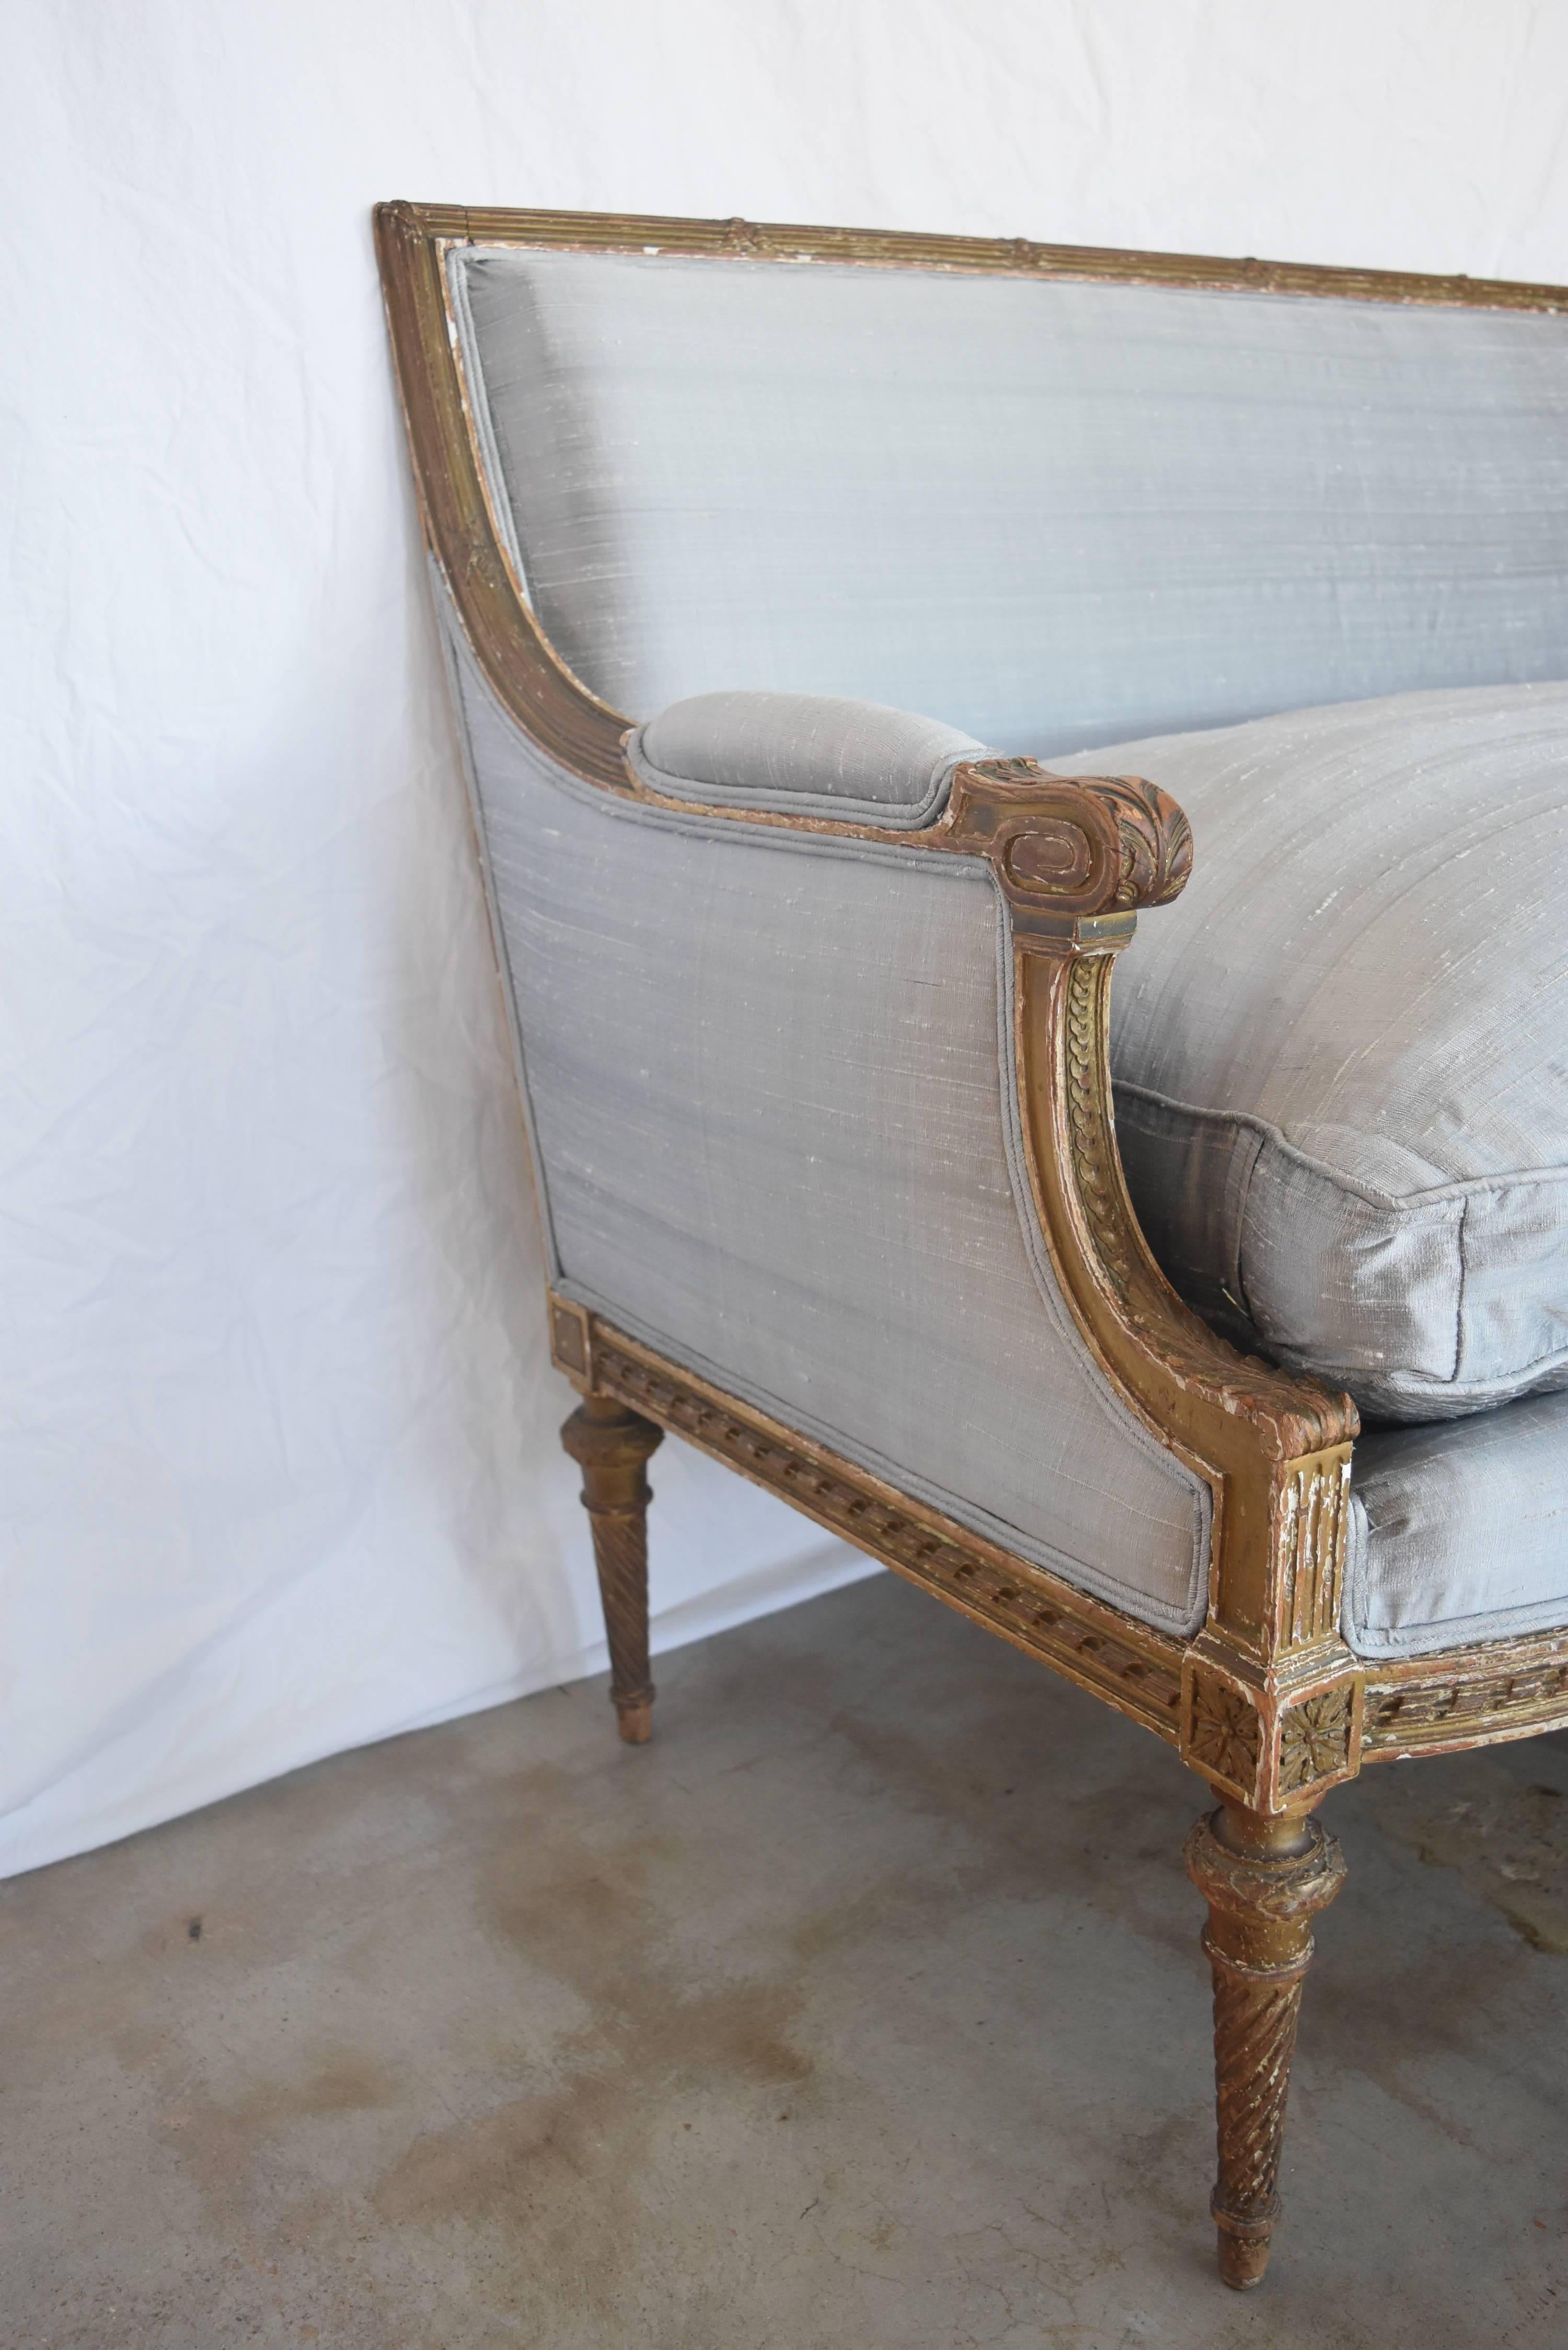 French Louis XVI has always been one of my favorite styles. Whether you want an dressy, casual, modern, or traditional look, it always works. This one is in great condition. It's hand-carved, the gilt is original and there is a little wear on the